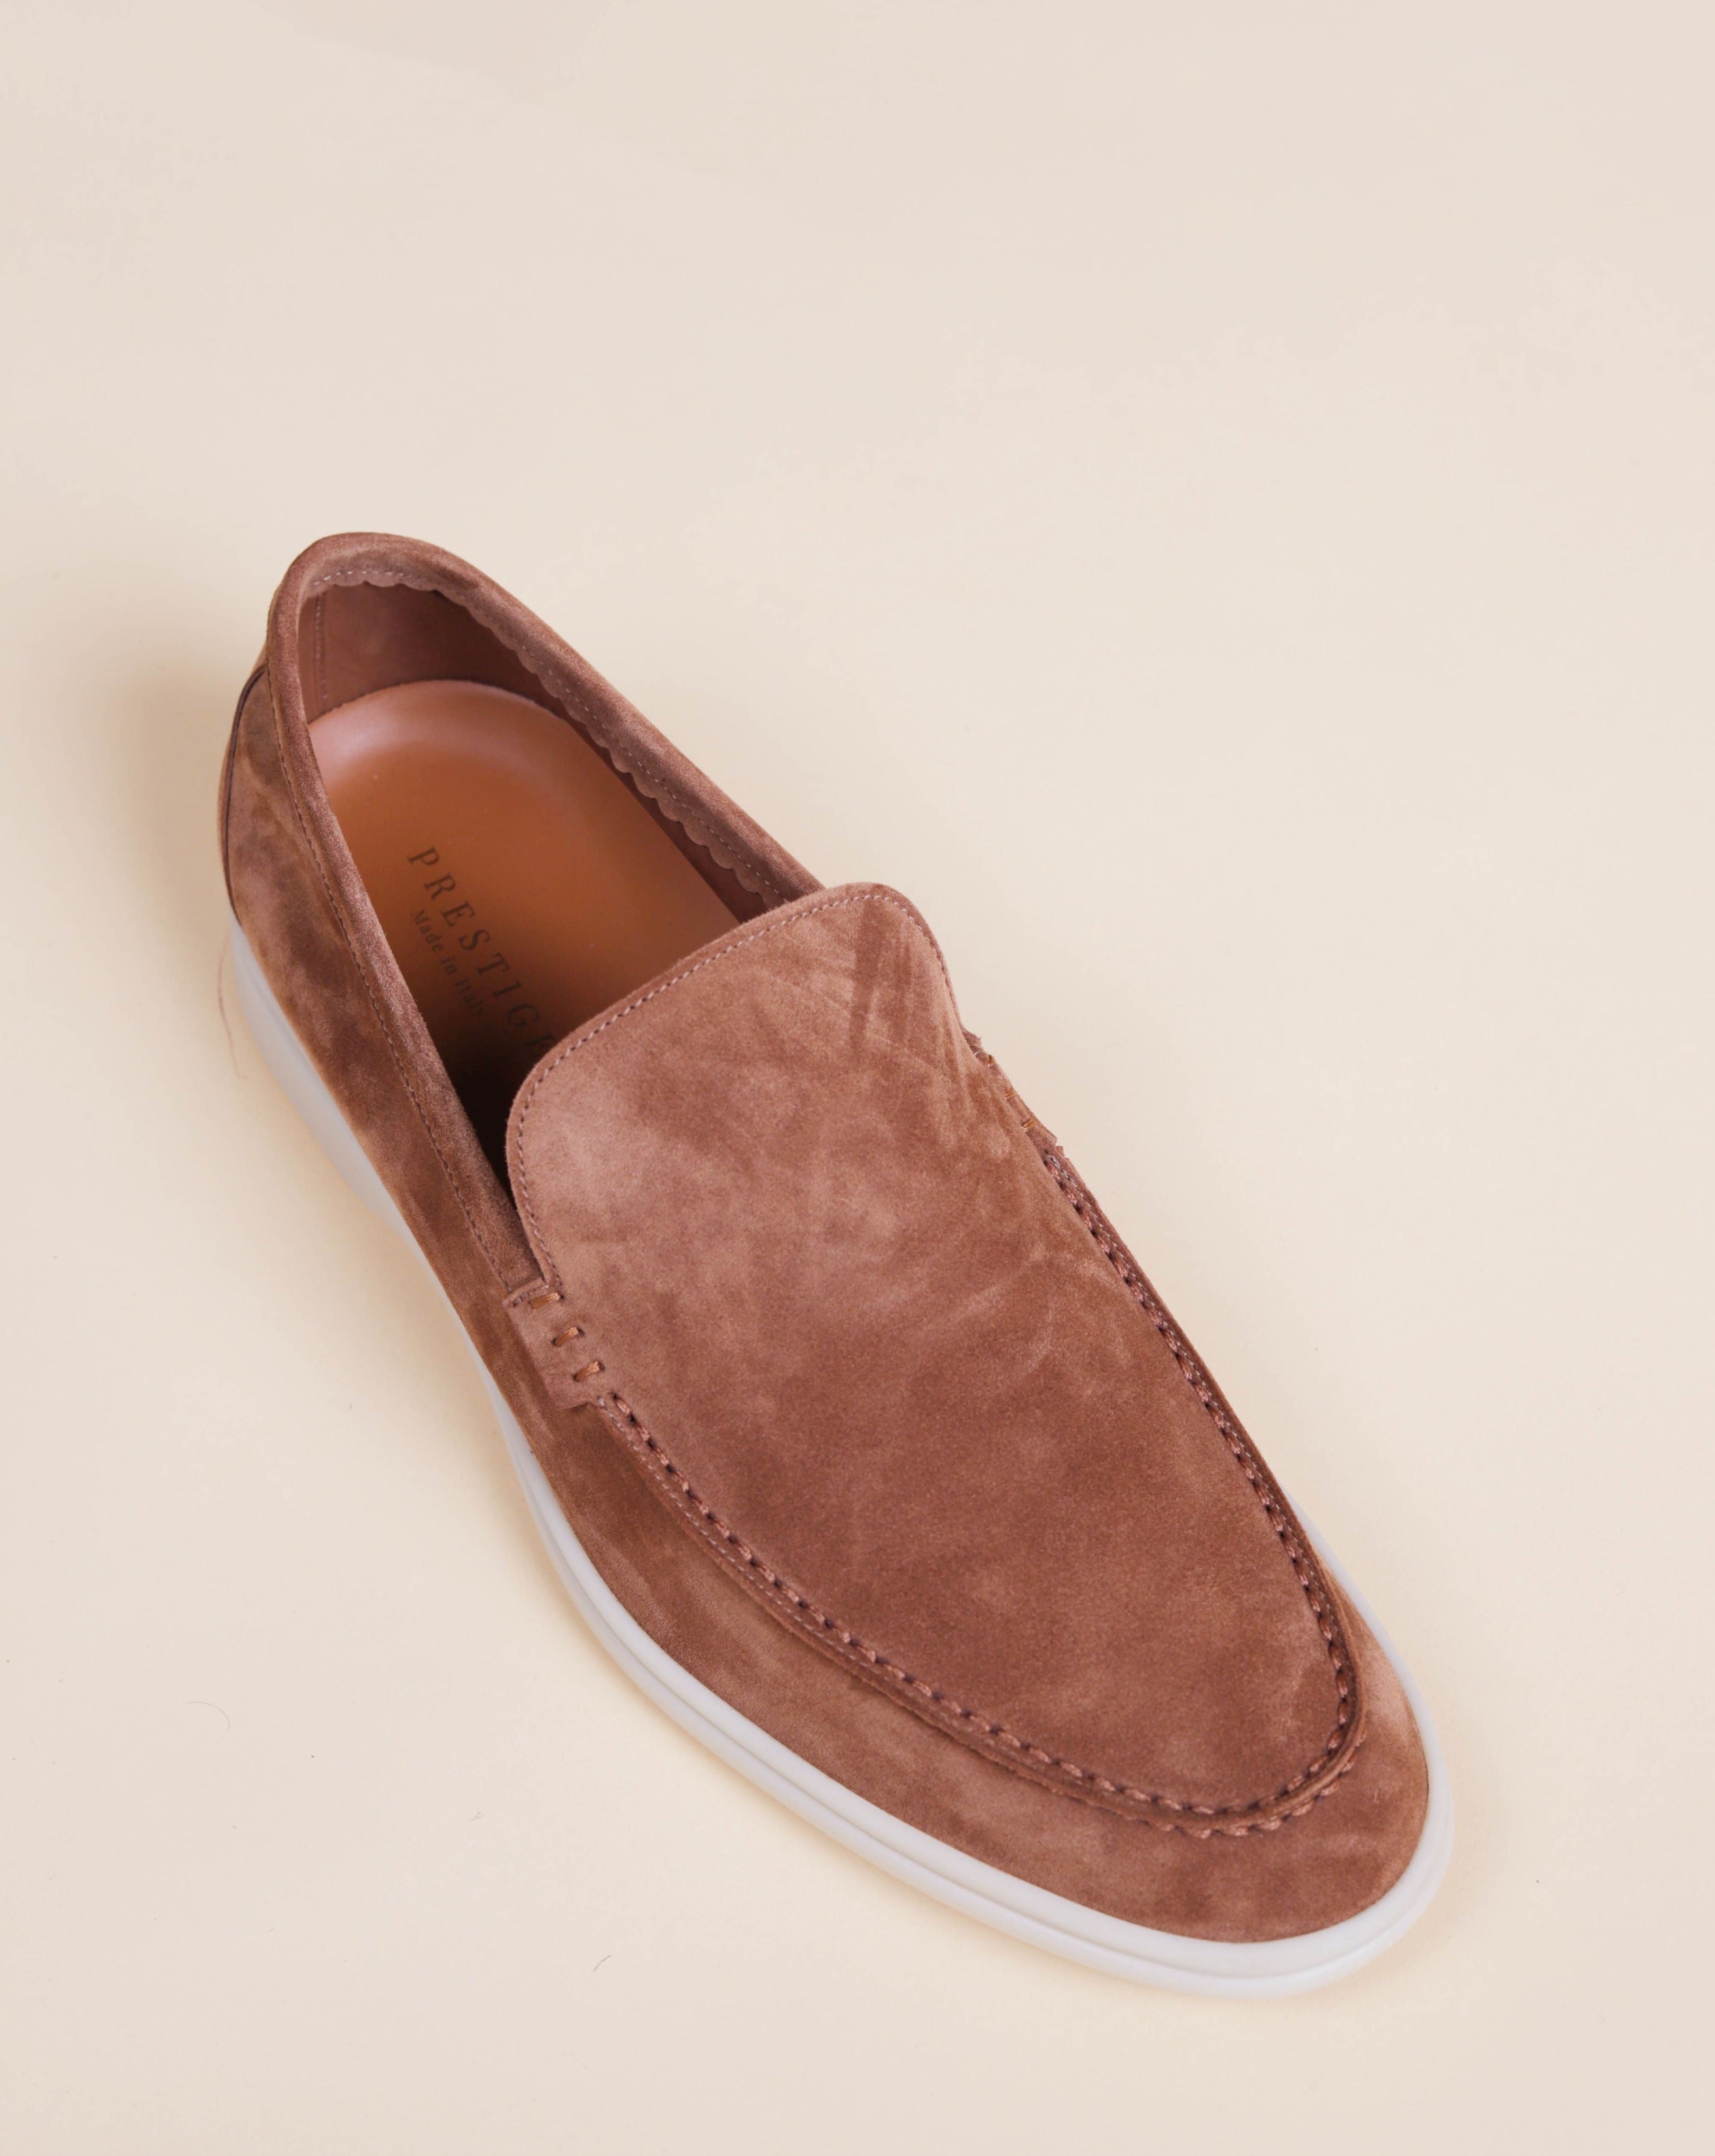 PS LOAFER SUEDE BROWN